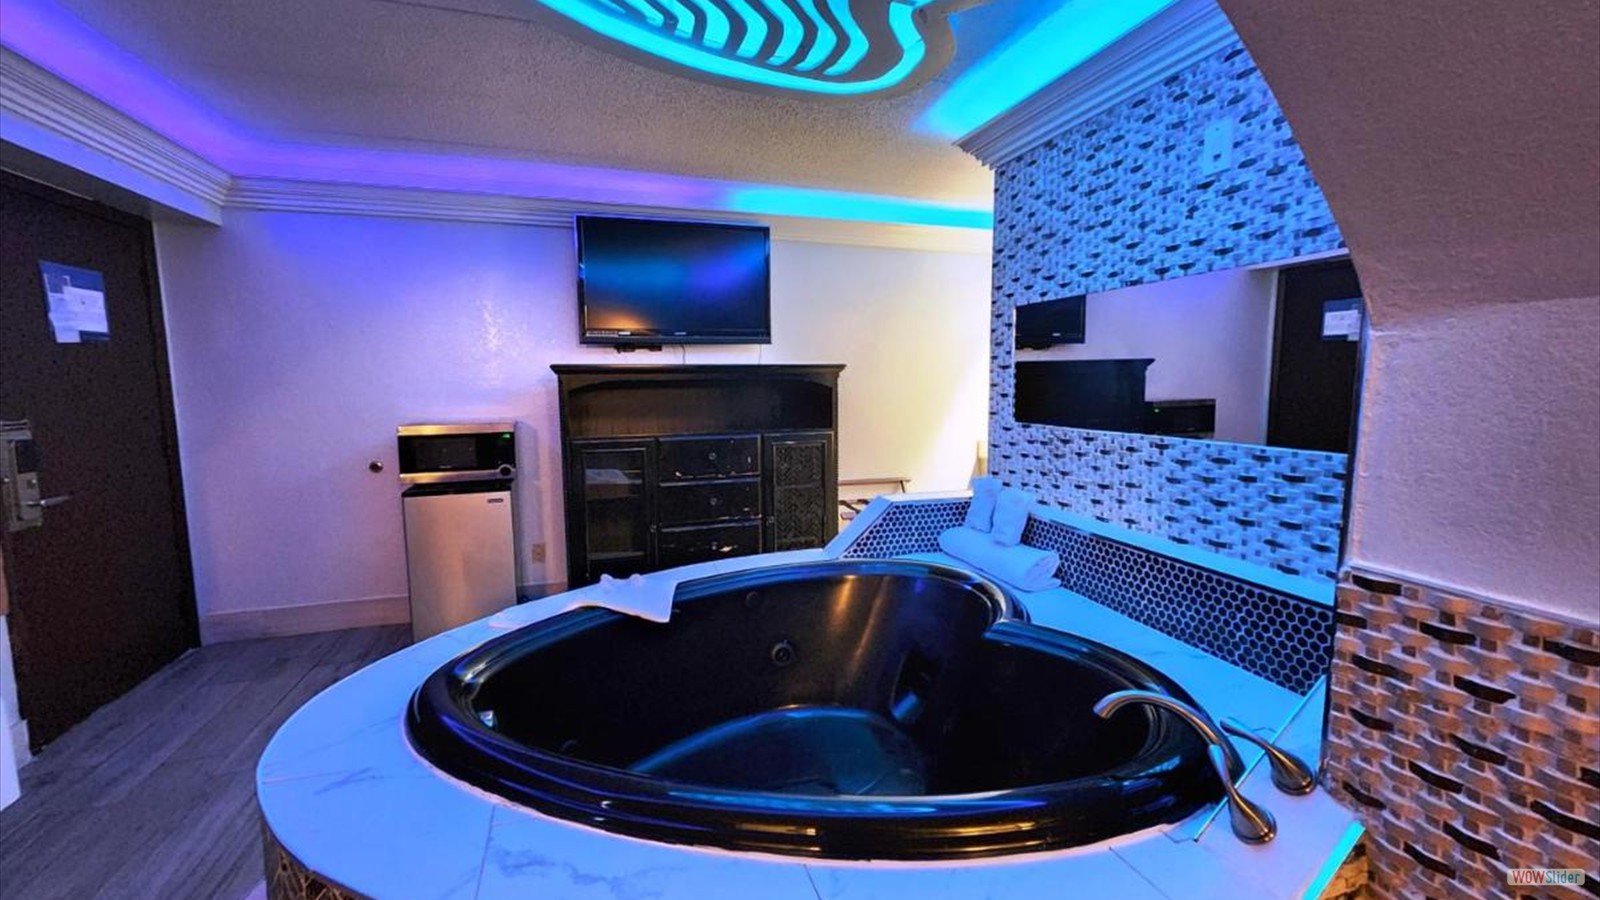 Guest Room With Jacuzzi